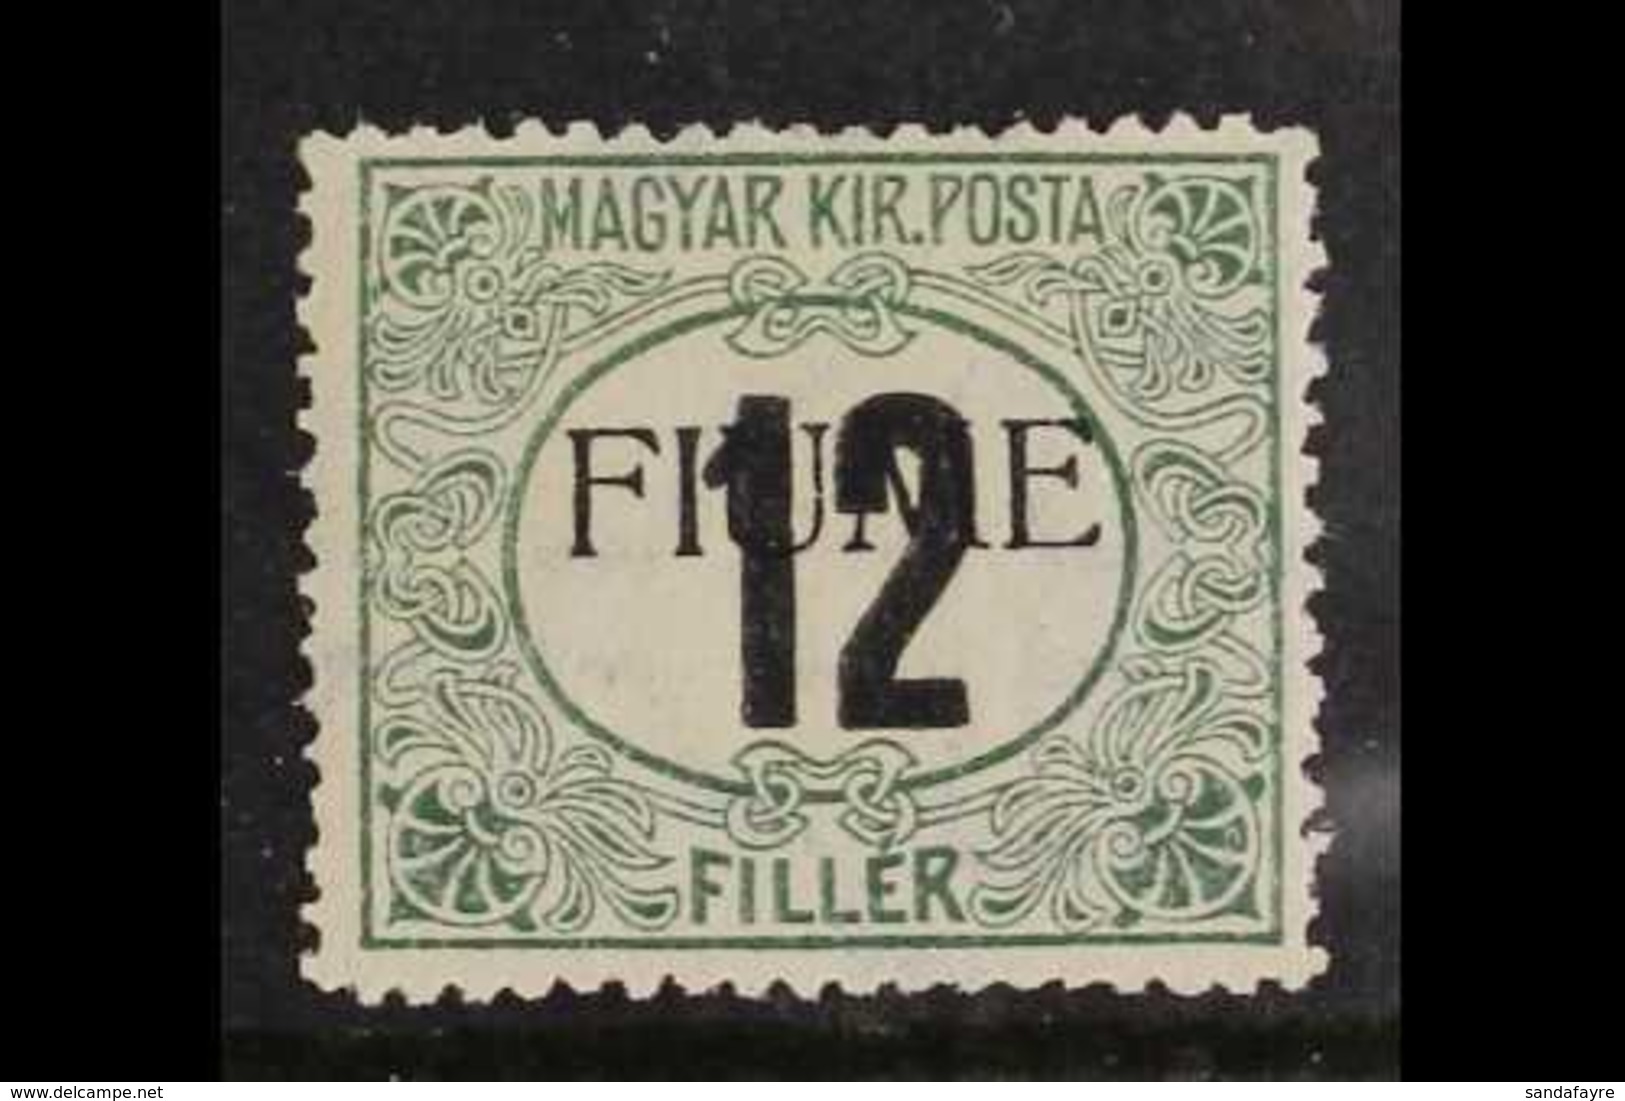 POSTAGE DUE  1918 12f Black & Green Overprint (Sassone 2, SG D30), Fine Mint, Very Fresh, With Raybaudi Photo-certificat - Fiume